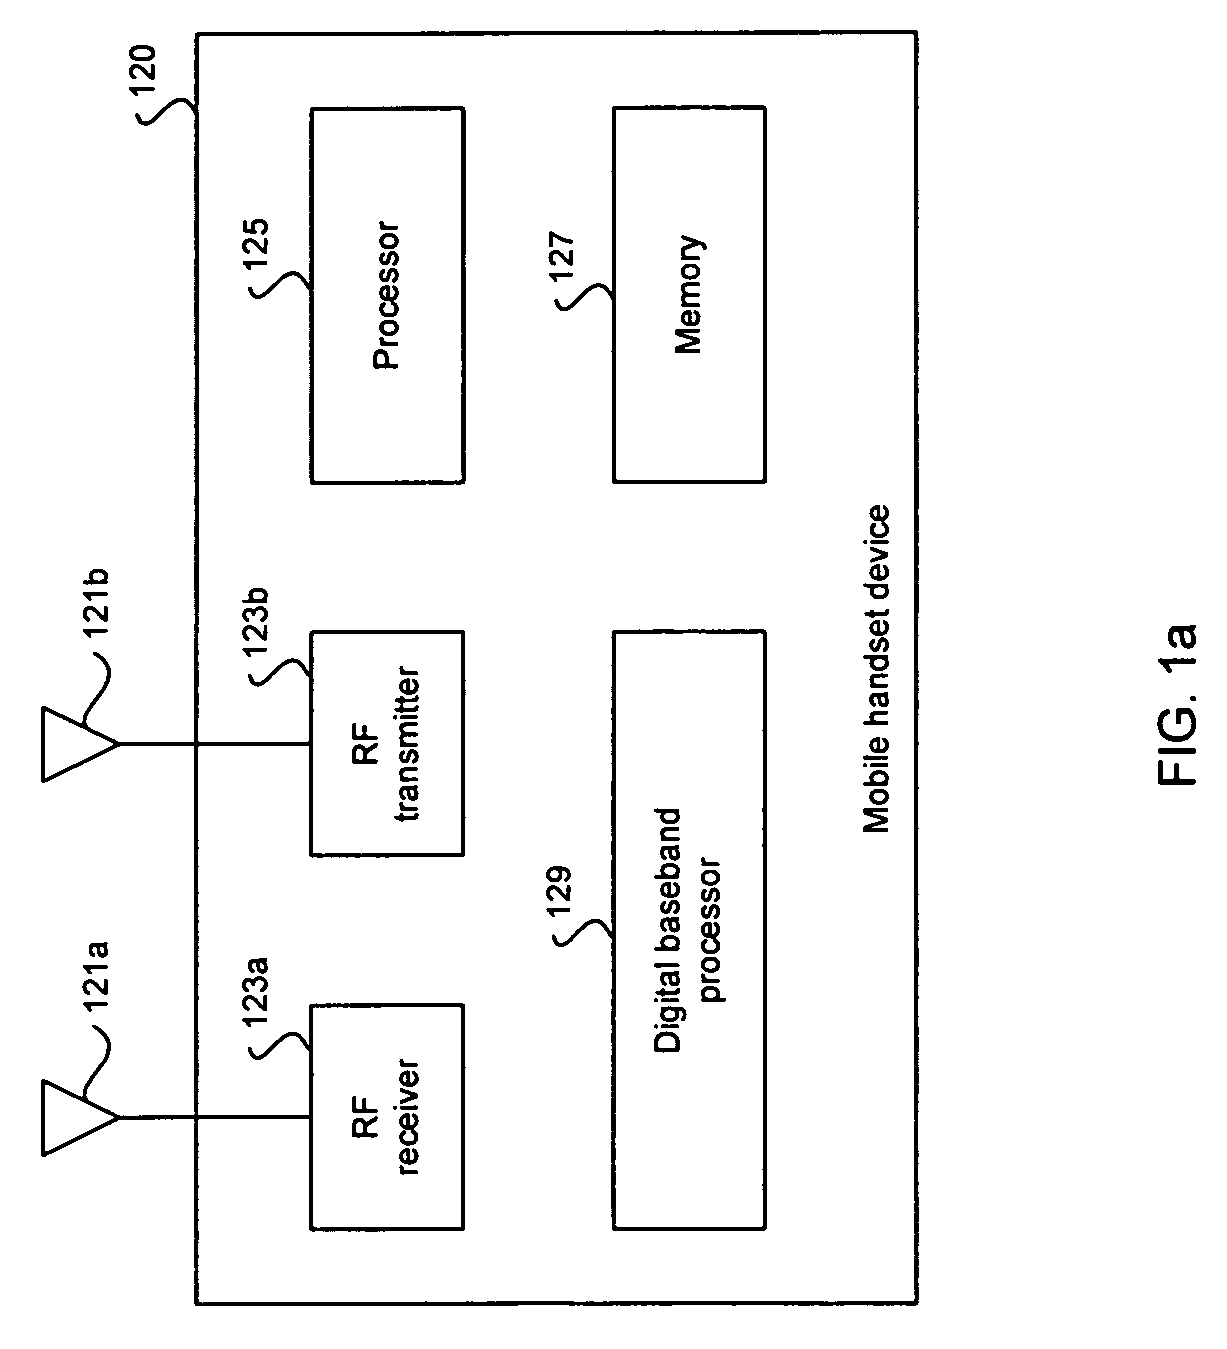 Method and system for DC offset correction loop for a mobile digital cellular television environment